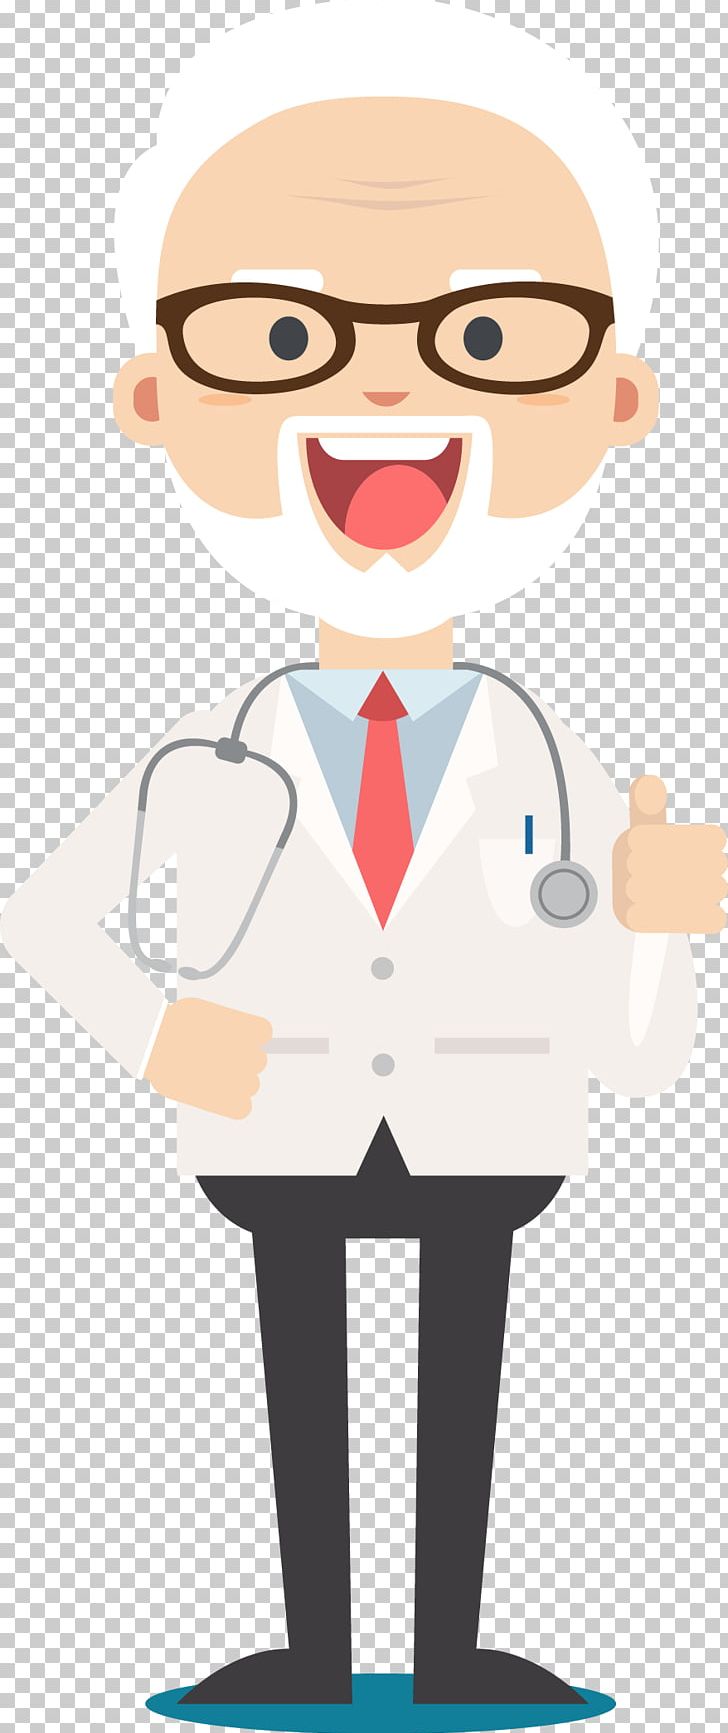 Physician Glasses Man Cartoon PNG, Clipart, Boy, Cartoon, Cartoon Character, Cartoon Eyes, Cartoons Free PNG Download